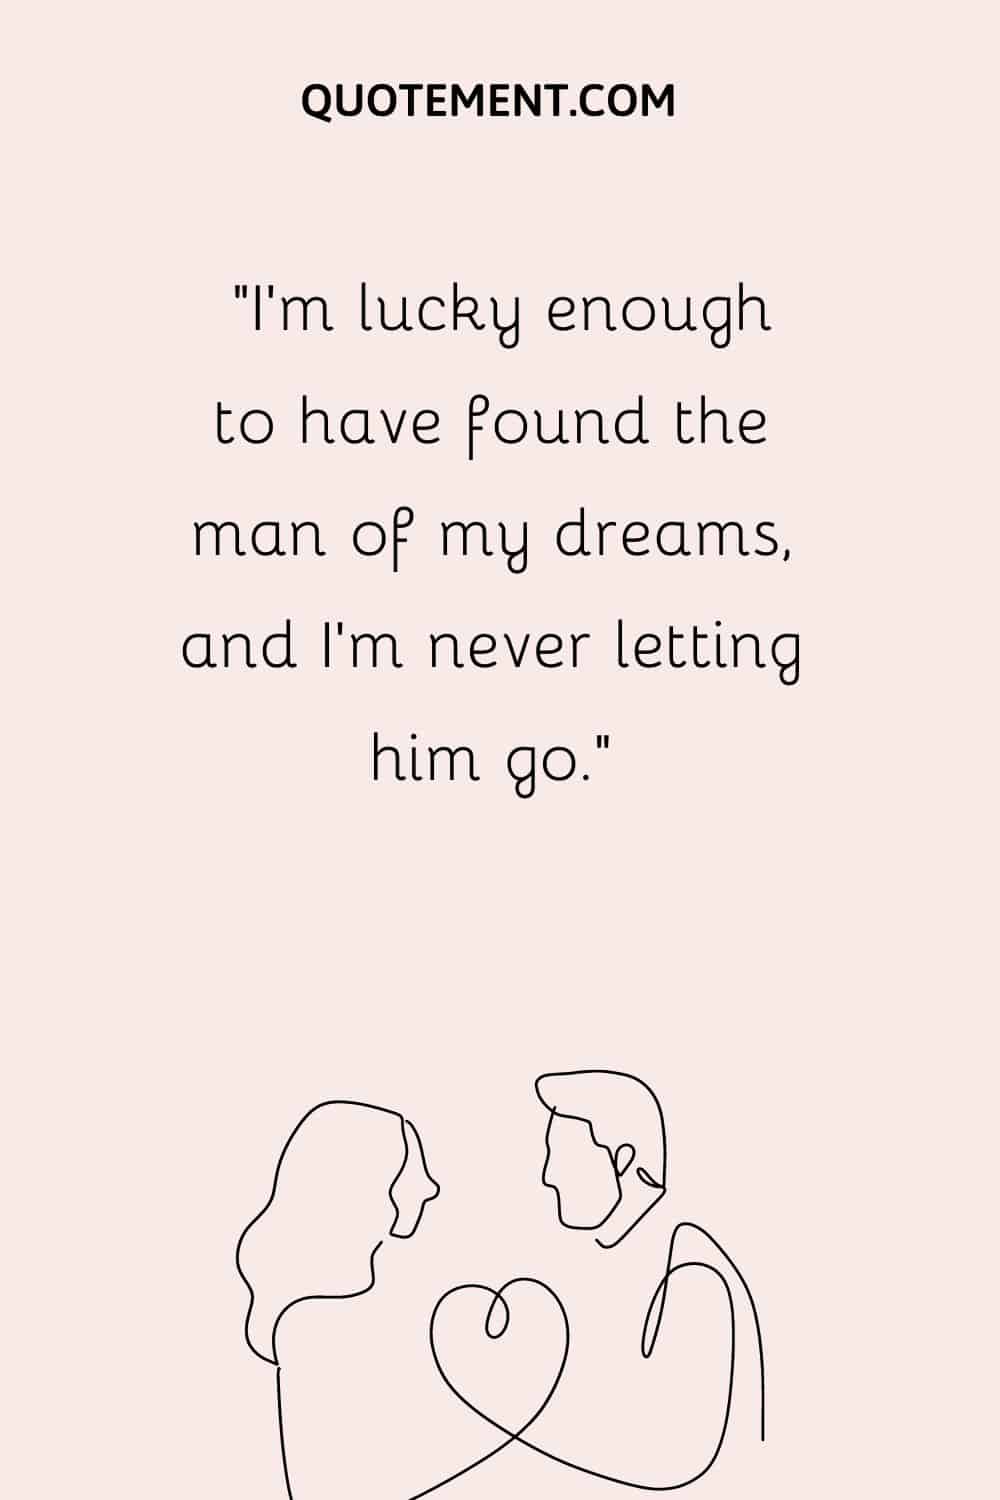 “I’m lucky enough to have found the man of my dreams, and I’m never letting him go.”